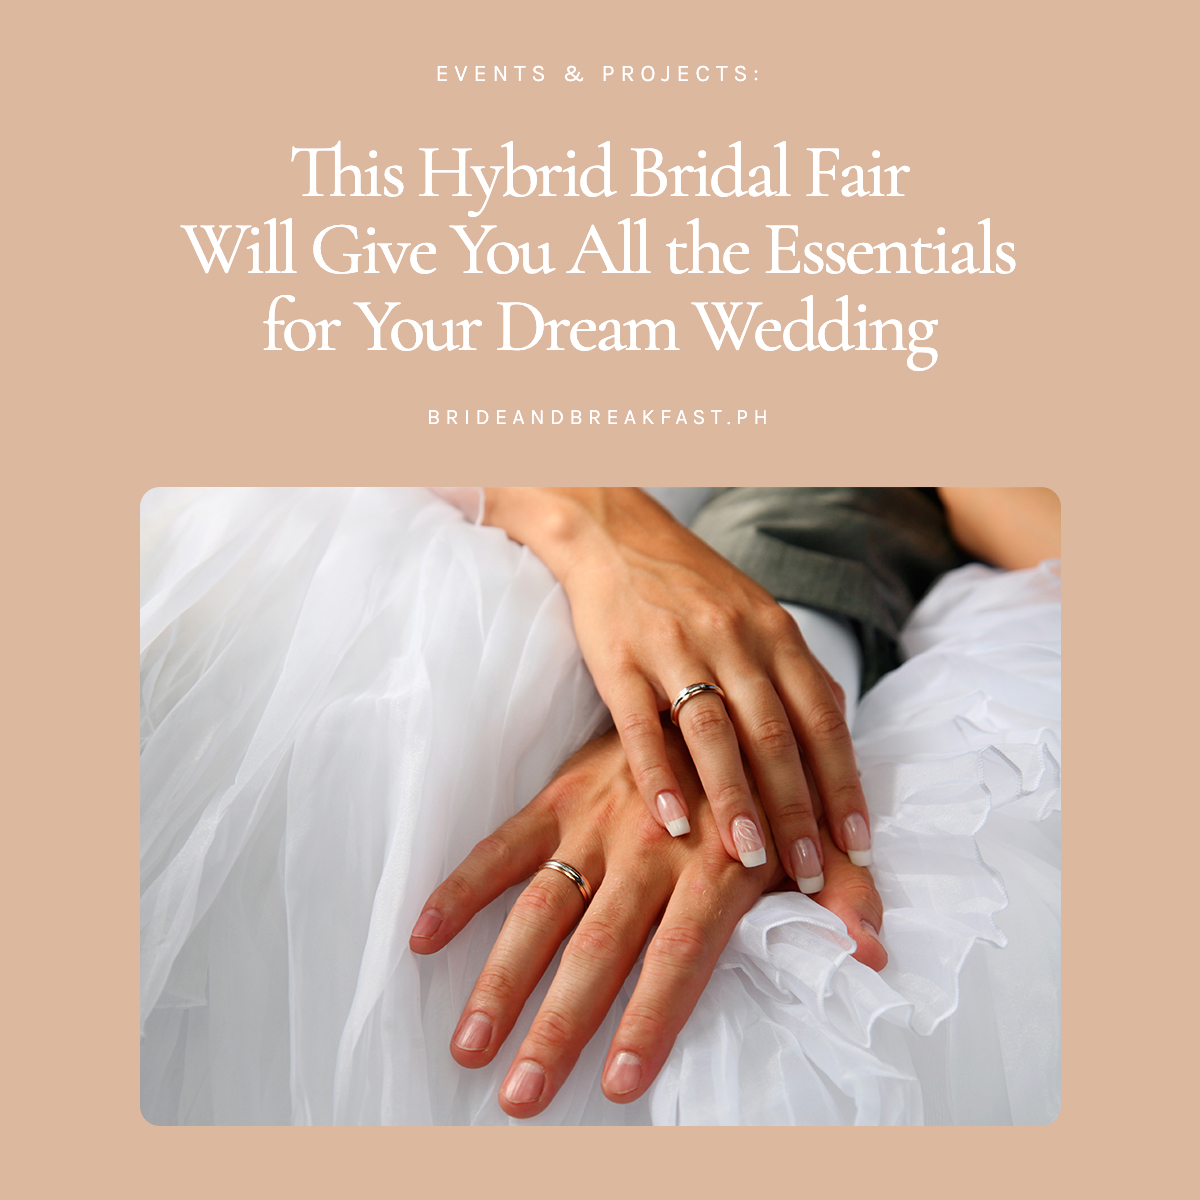 This Hybrid Bridal Fair Will Give You All the Essentials for Your Dream Wedding